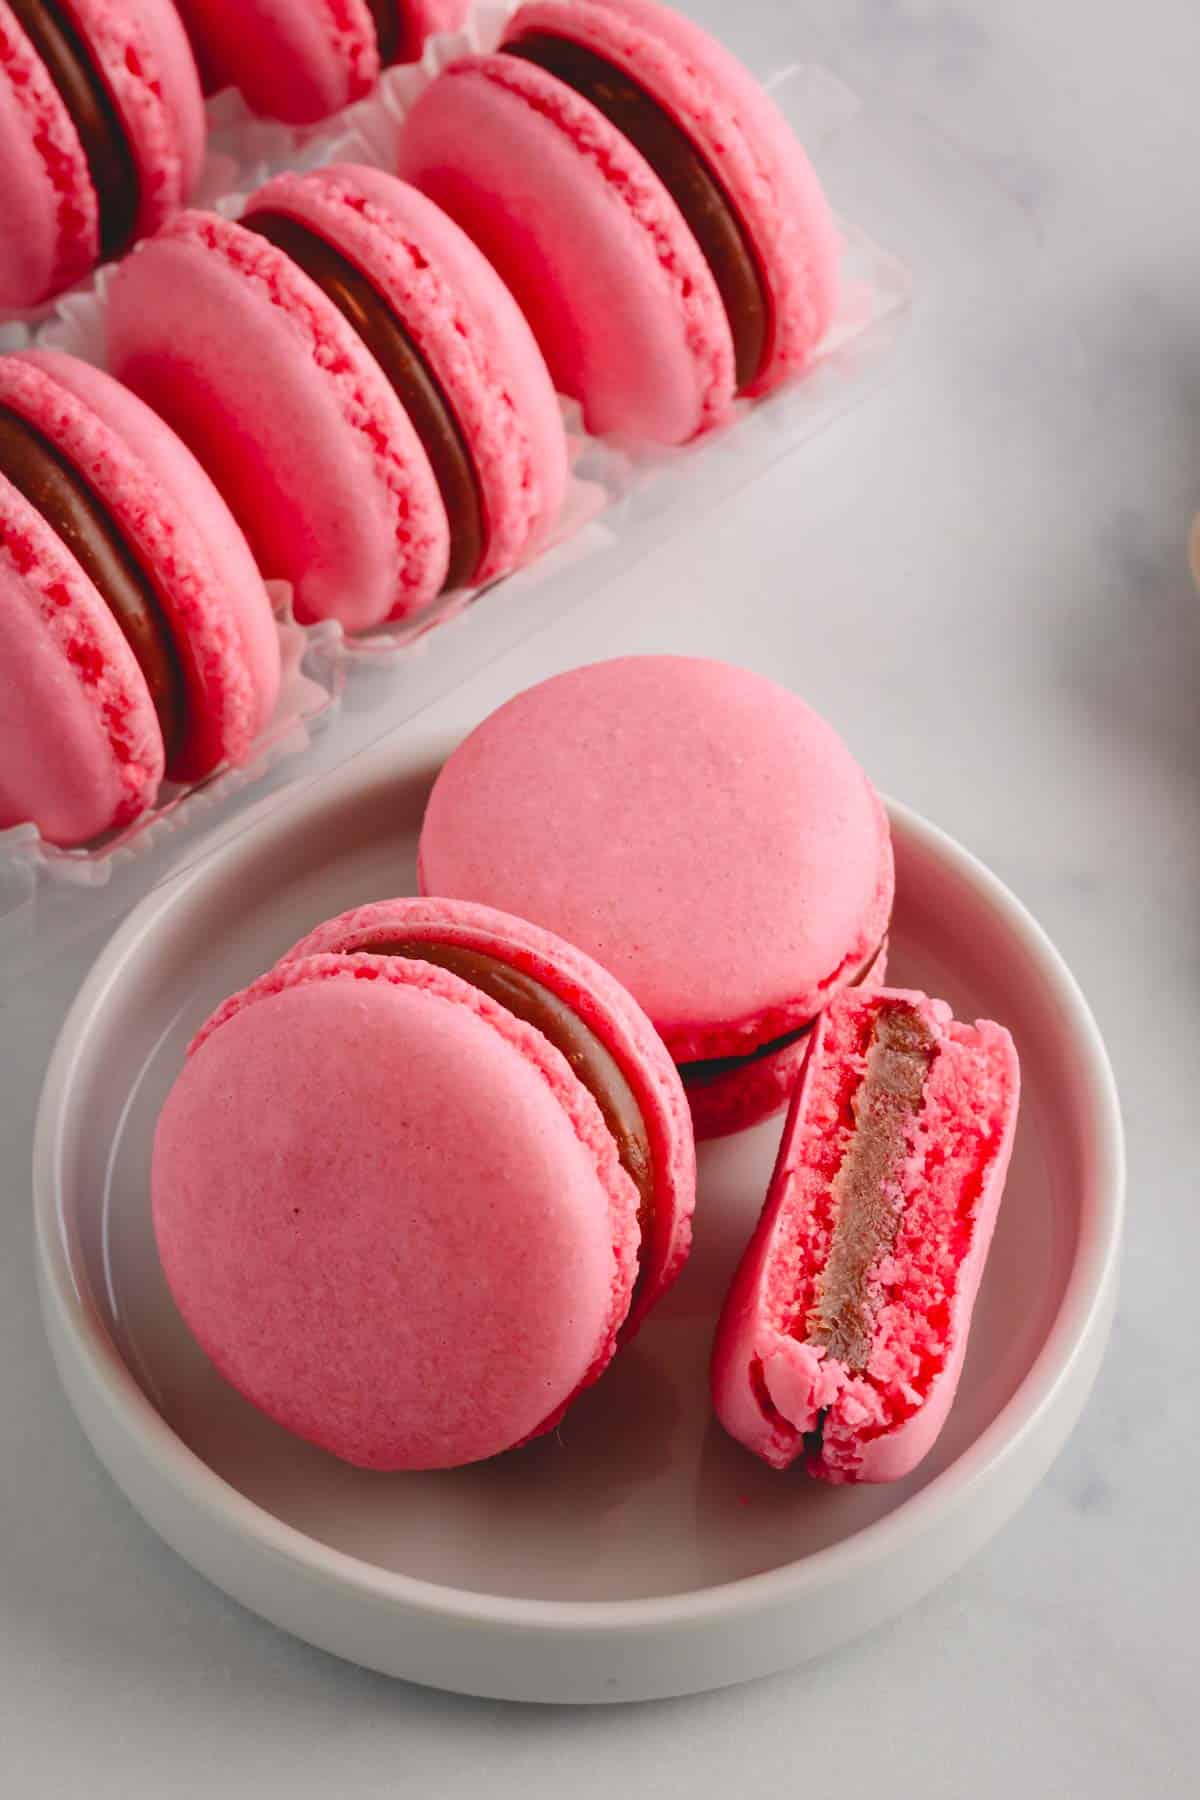 French Macaron Recipe For Beginners